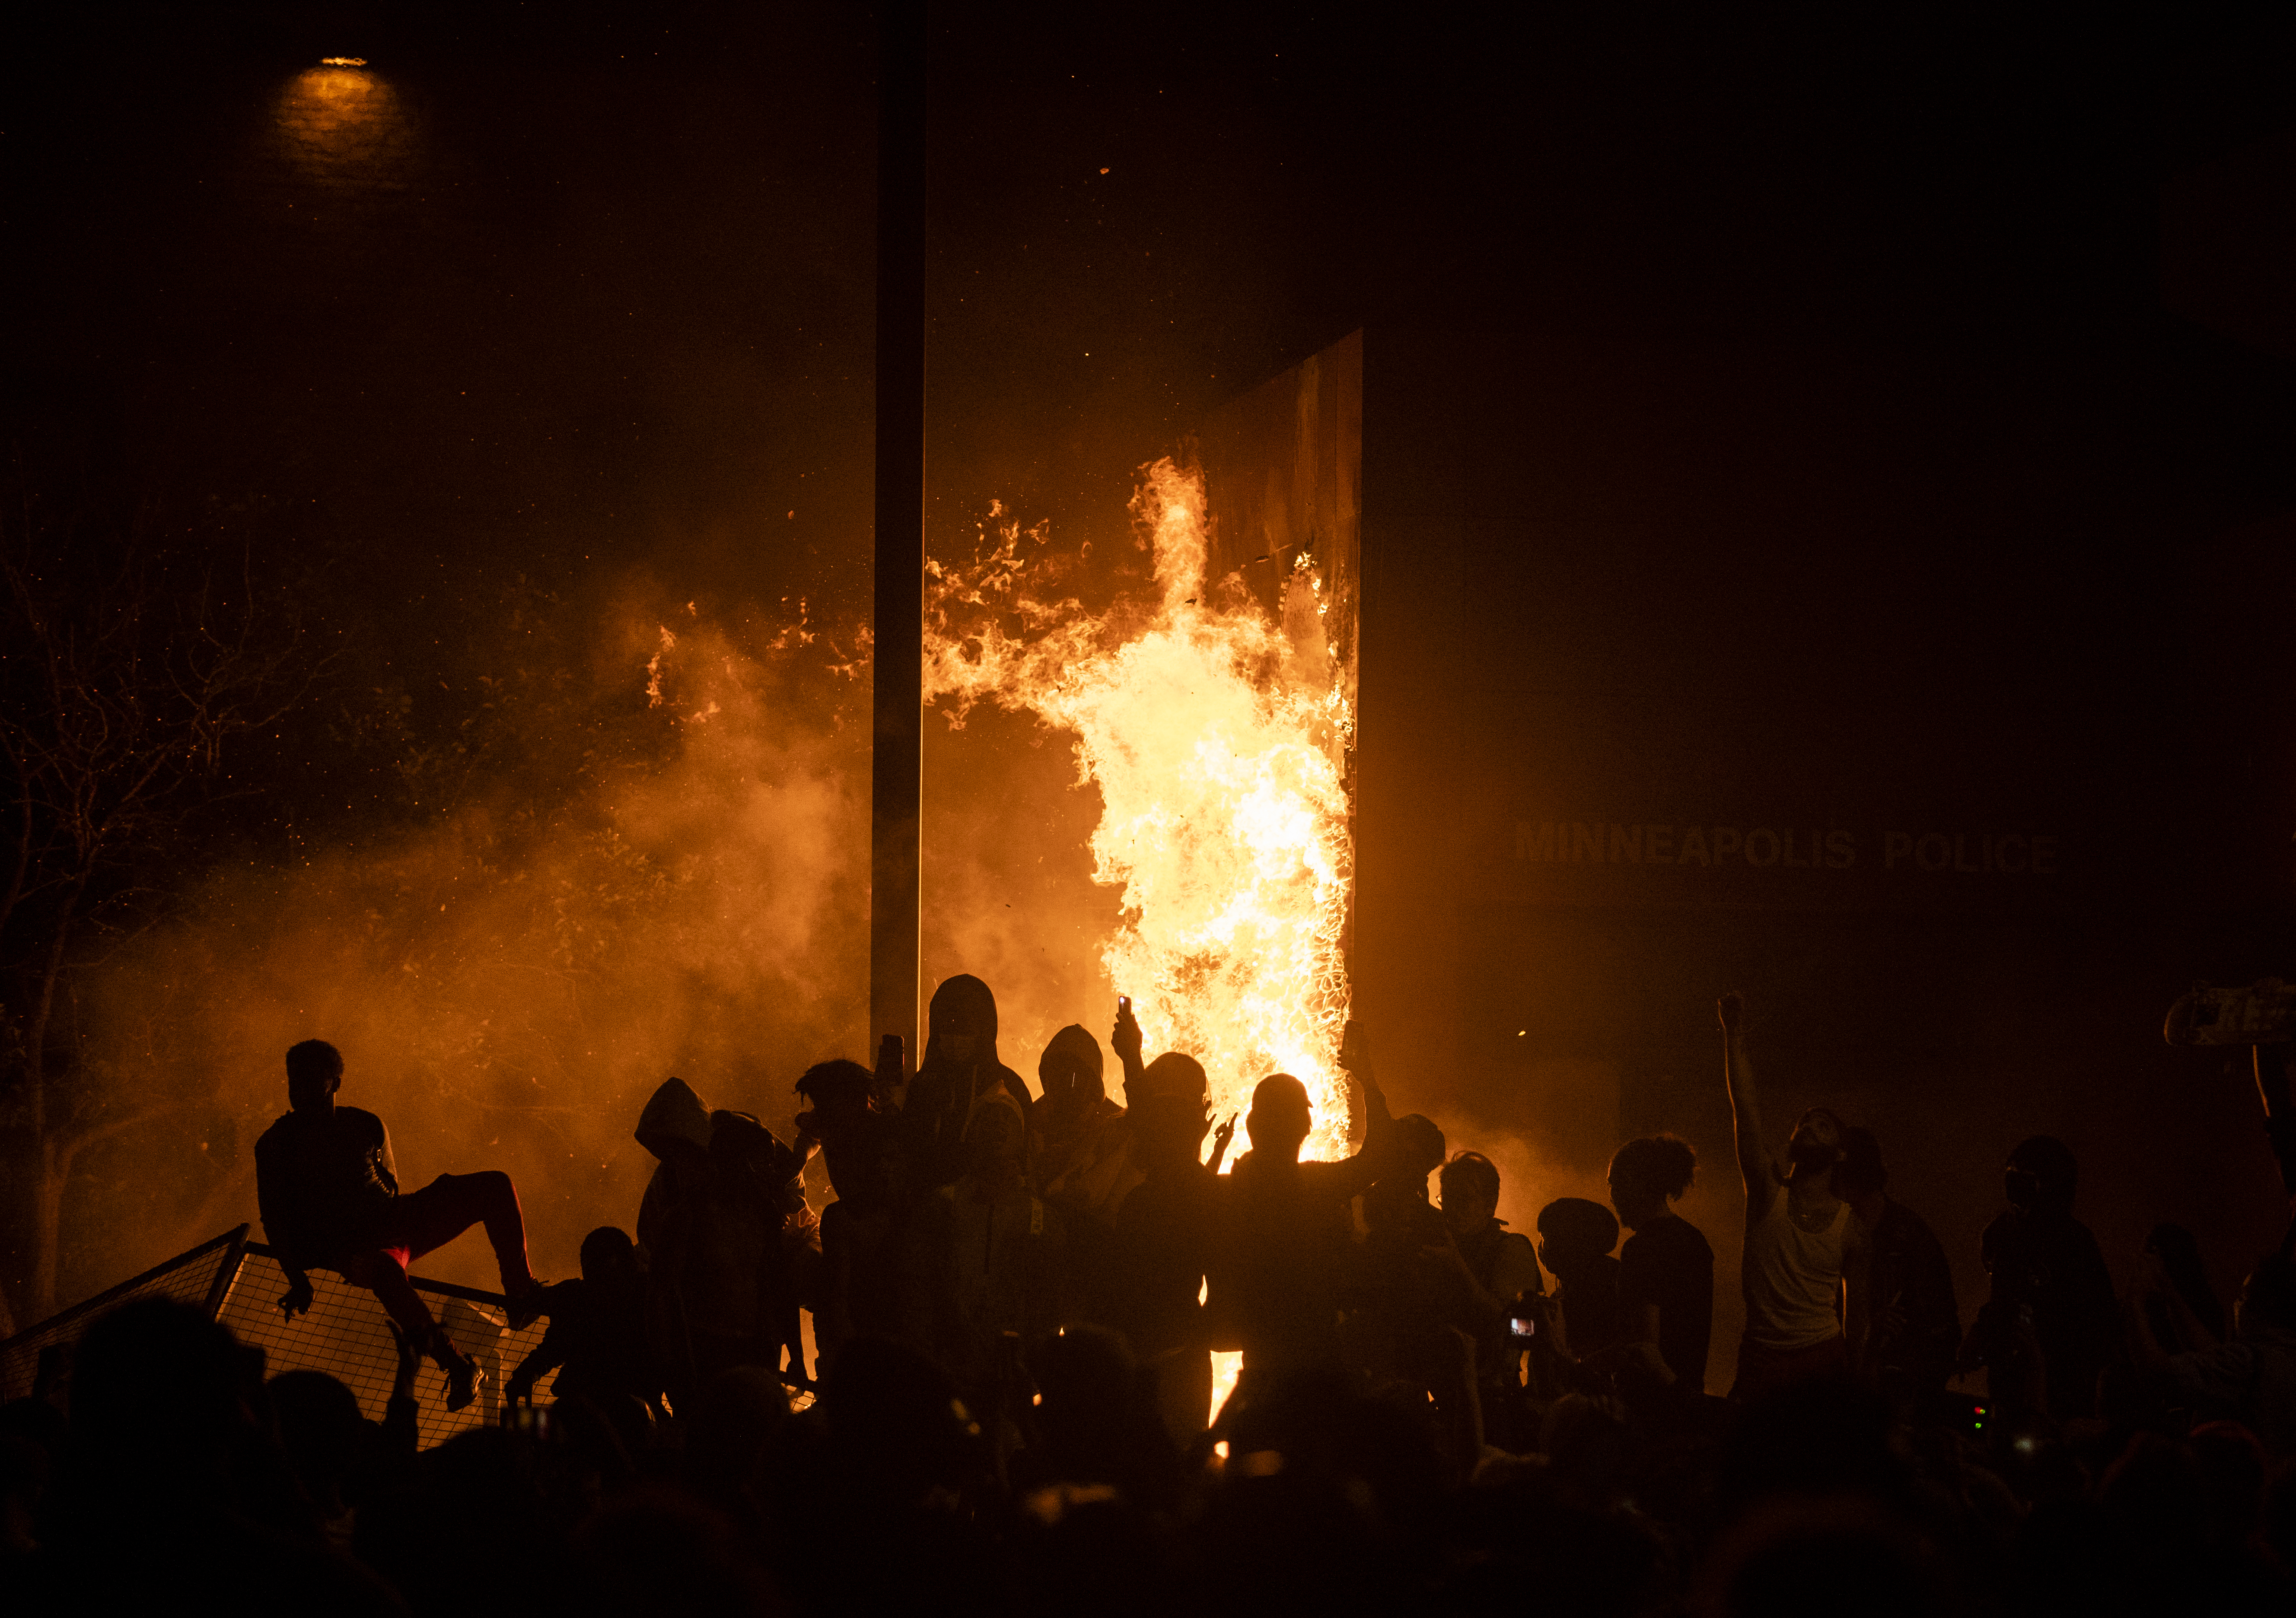 MINNEAPOLIS, MN - MAY 28: Protesters cheer as the Third Police Precinct burns behind them on May 28, 2020 in Minneapolis, Minnesota. As unrest continues after the death of George Floyd police abandoned the precinct building, allowing protesters to set fire to it. (Photo by Stephen Maturen/Getty Images)